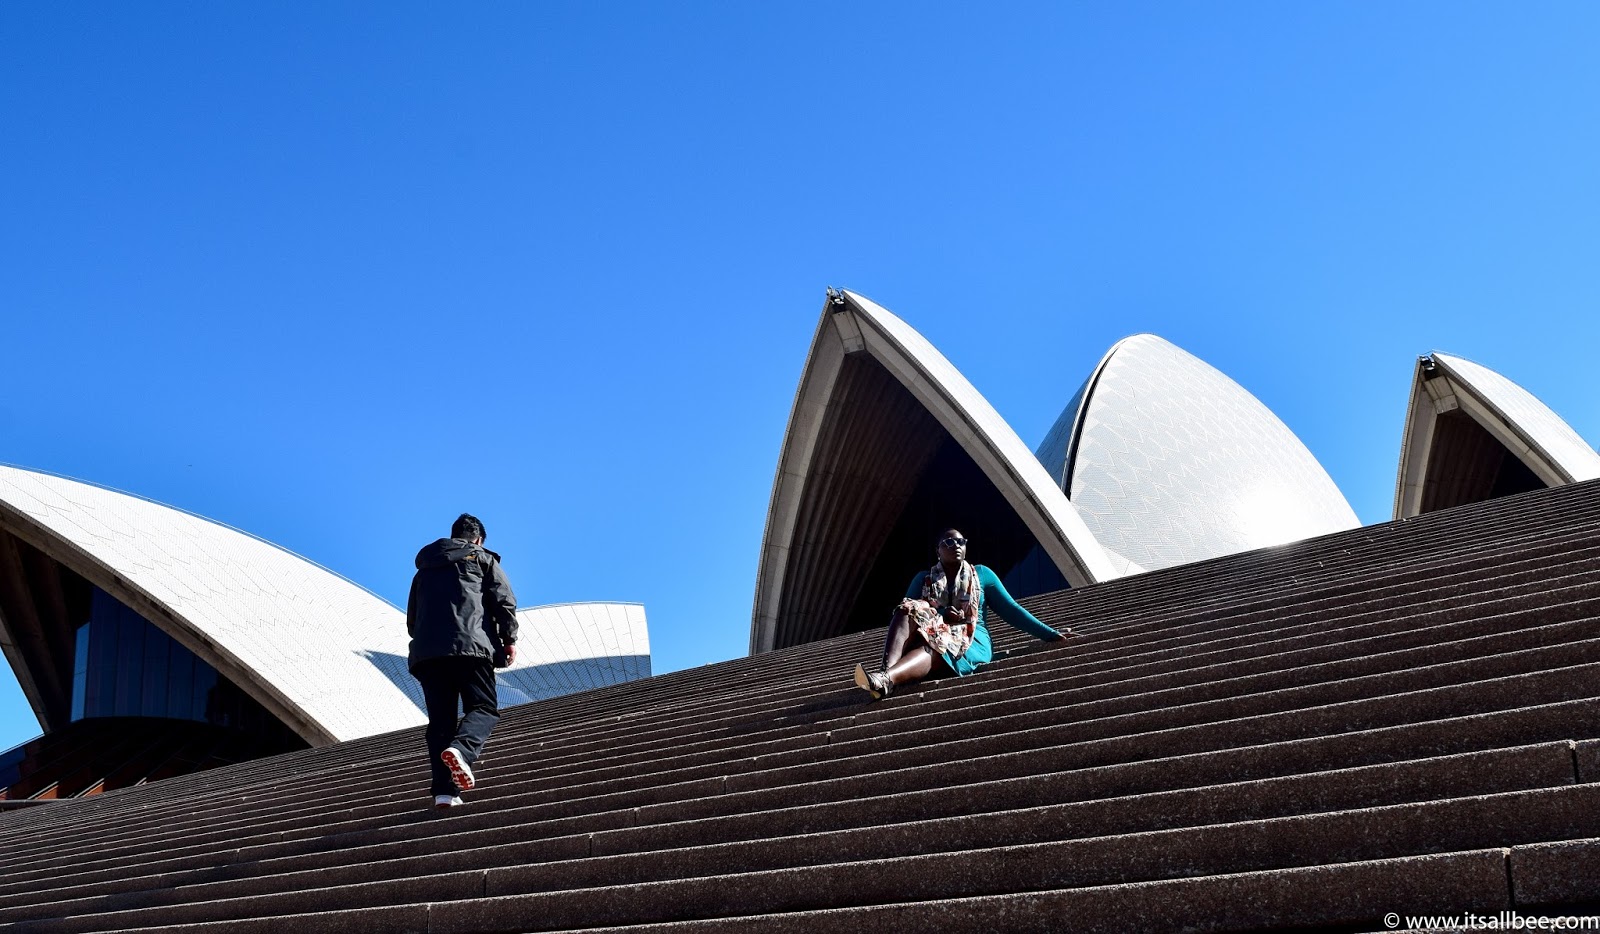 Top 10 Things To Do In Sydney Australia - Places To Visit & Where To Stay #australia #traveltip #sydney #trips #citybreaks